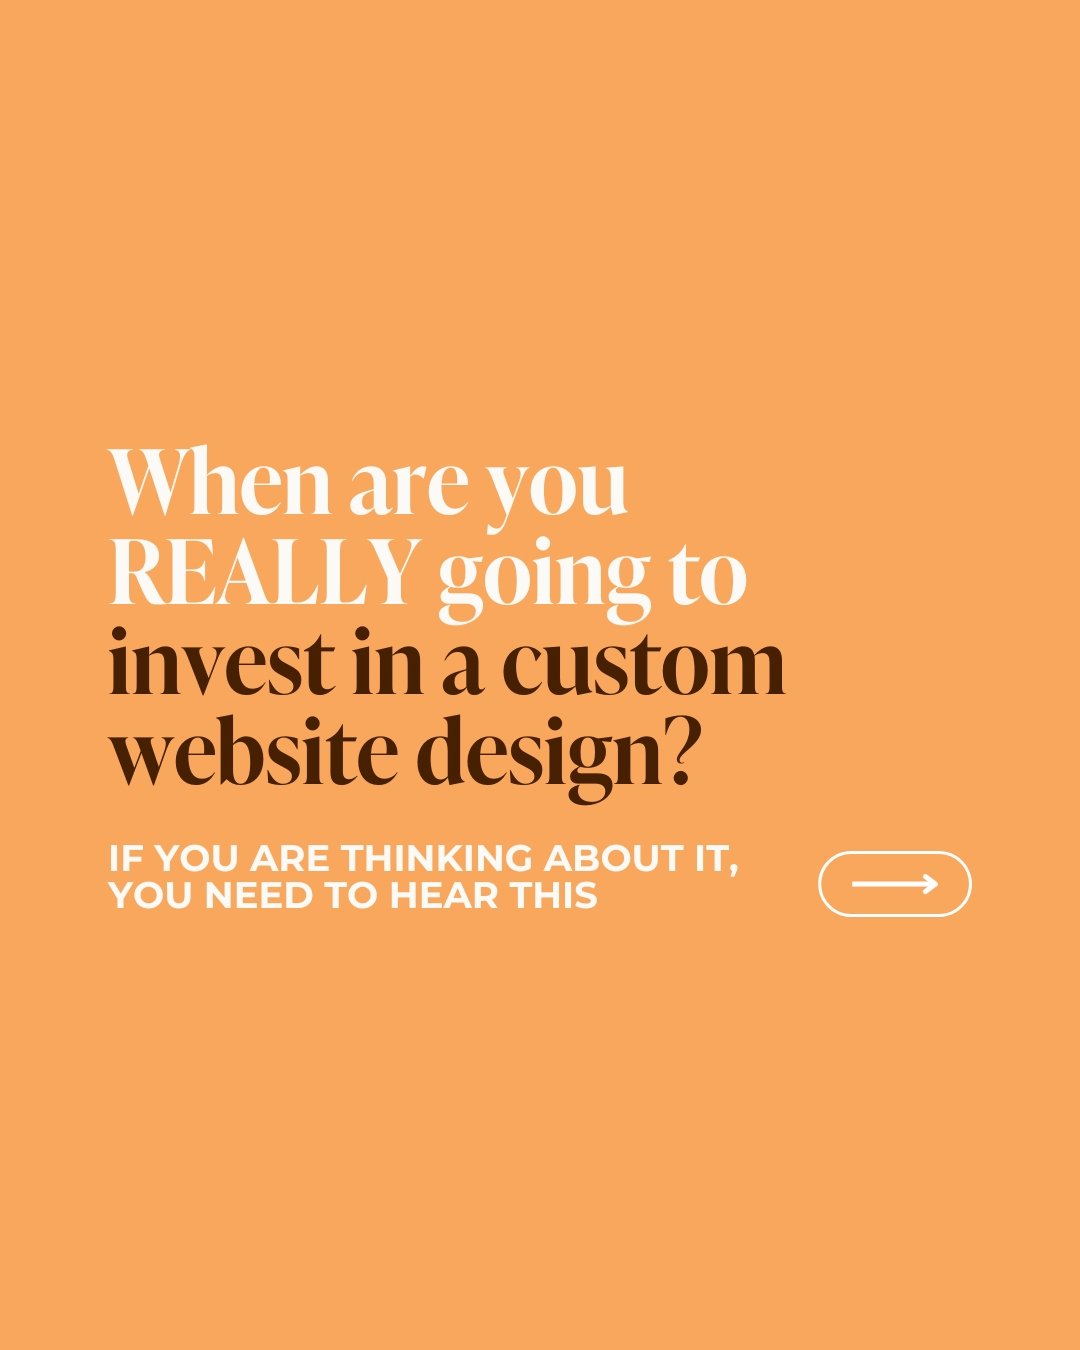 Let's be honest...

Sometimes a free template just won't cut it.

But when is it REALLY time to invest in a custom website design? 

Here are some signs:

✨ Your website blends in with a million others.
✨ Your site is clunky and doesn't meet your bus